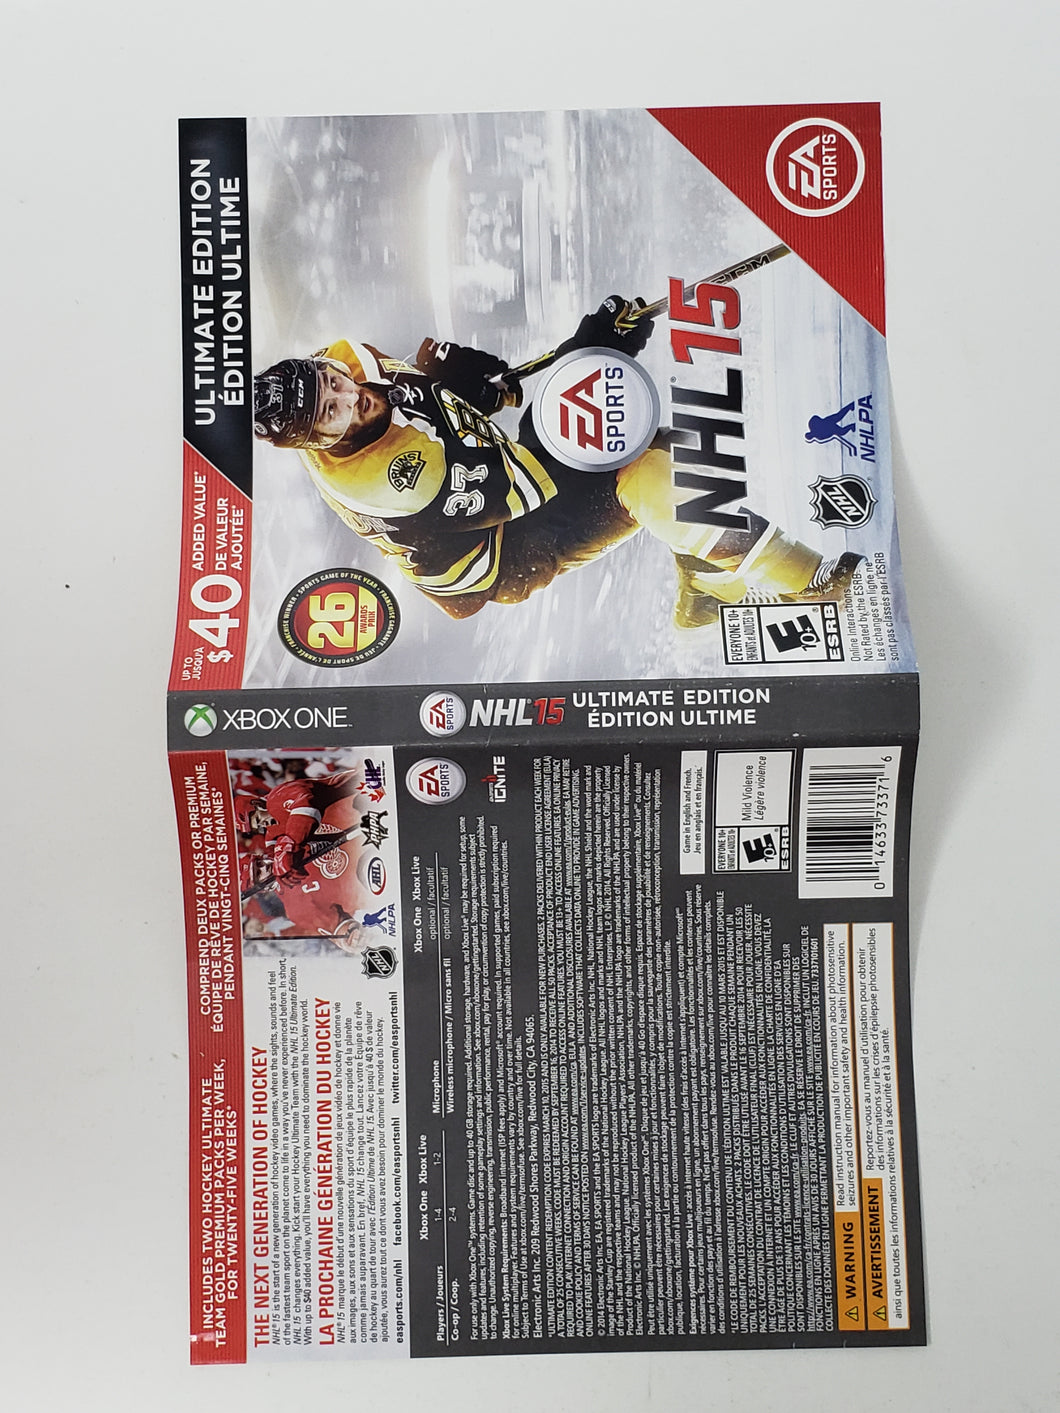 NHL 15 [Ultimate Edition] [Cover art] - Microsoft Xbox One